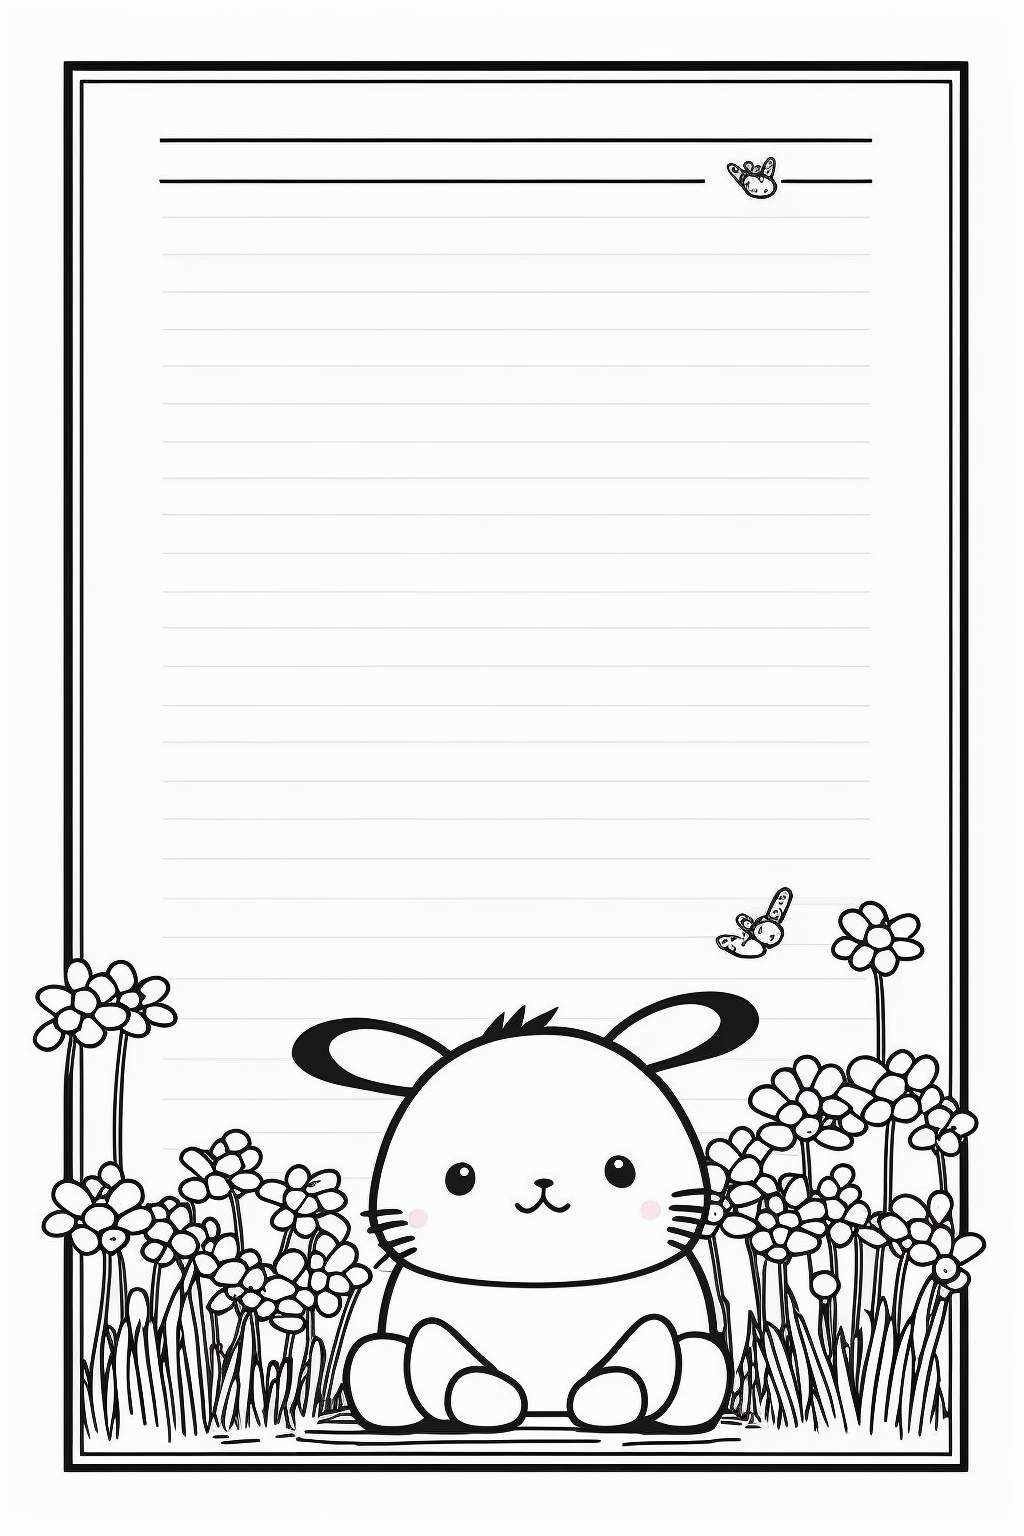 AI Midjourney Prompt for Kids Coloring Notebook Pages